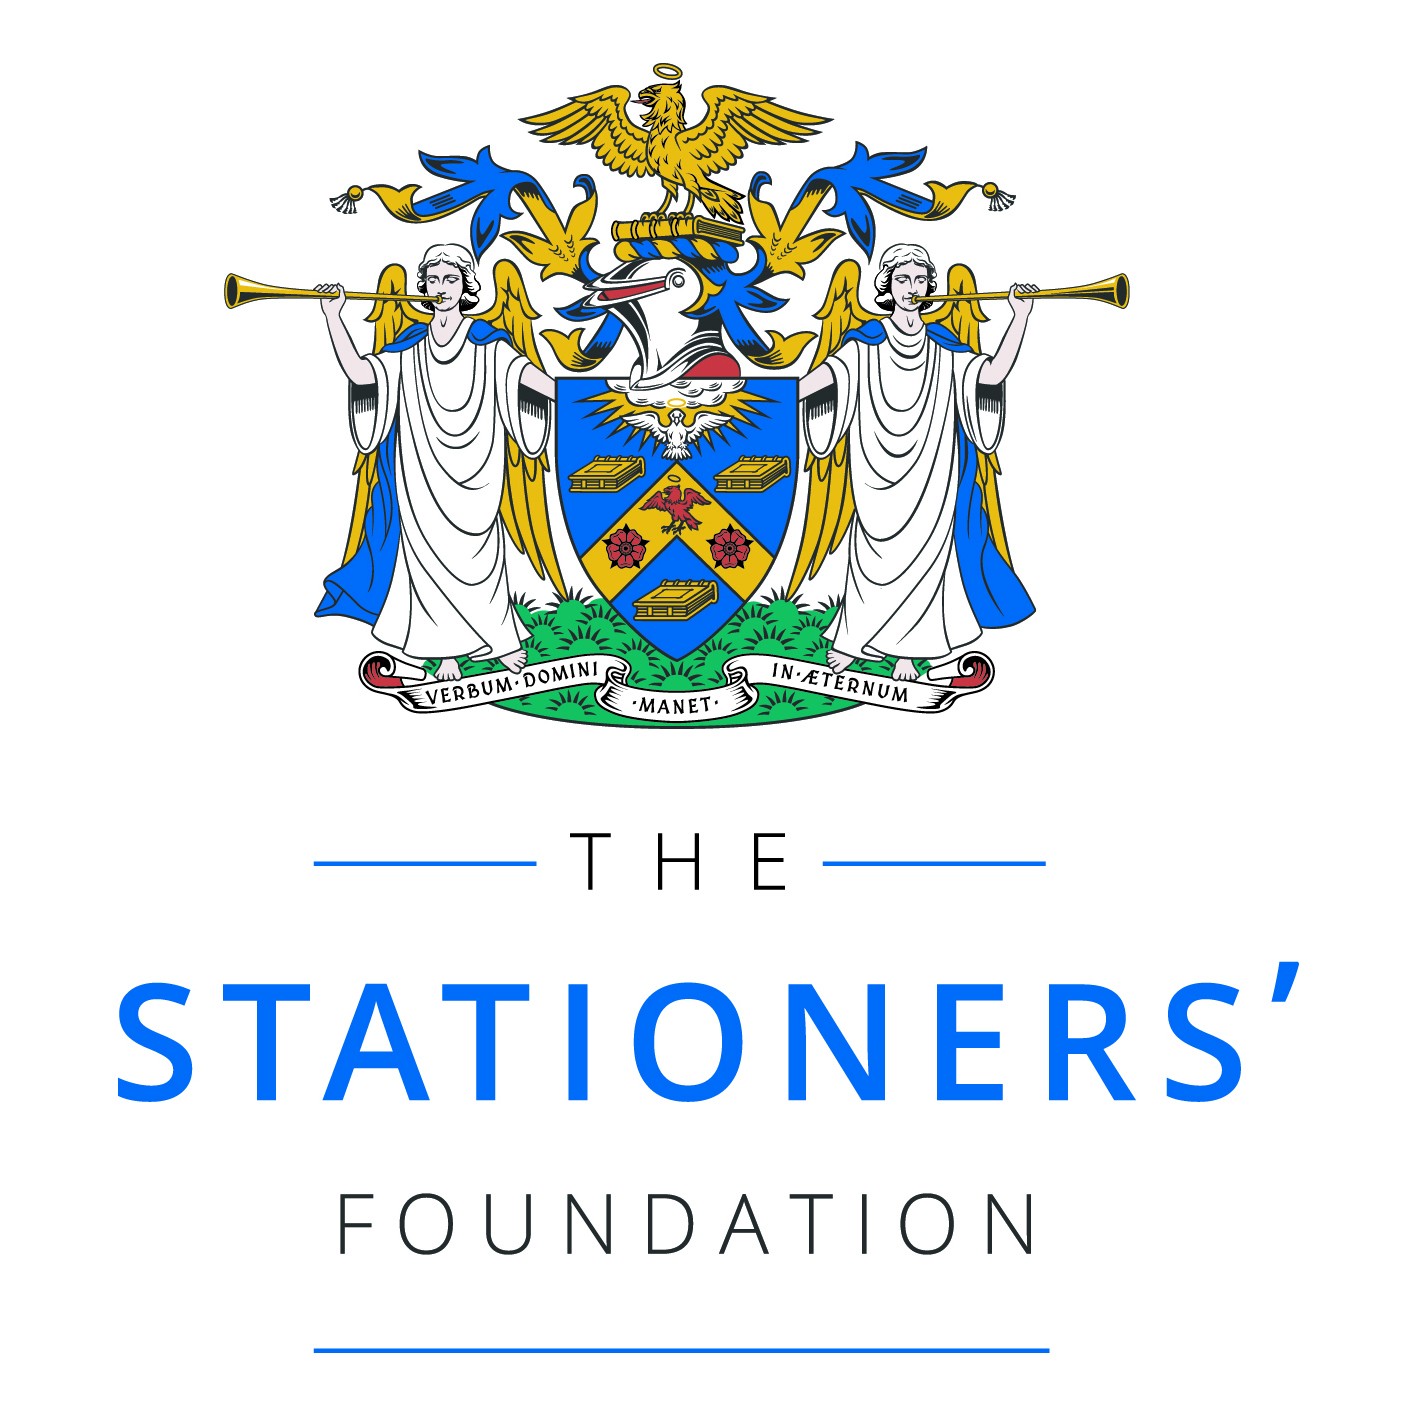 The Stationers' Foundation